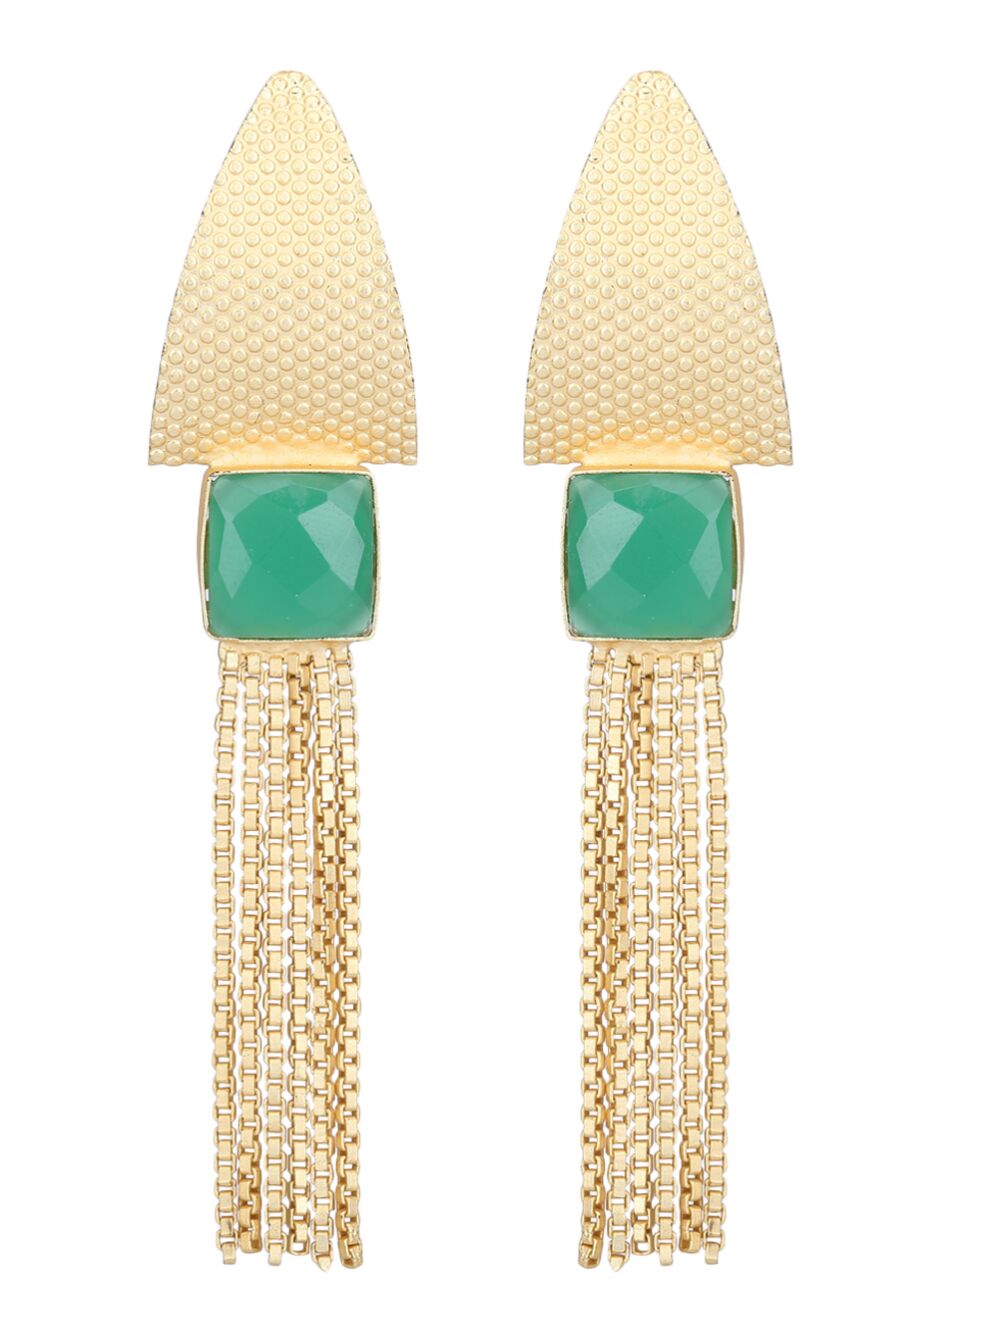 Handcrafted Green Stone Matte Gold Earrings